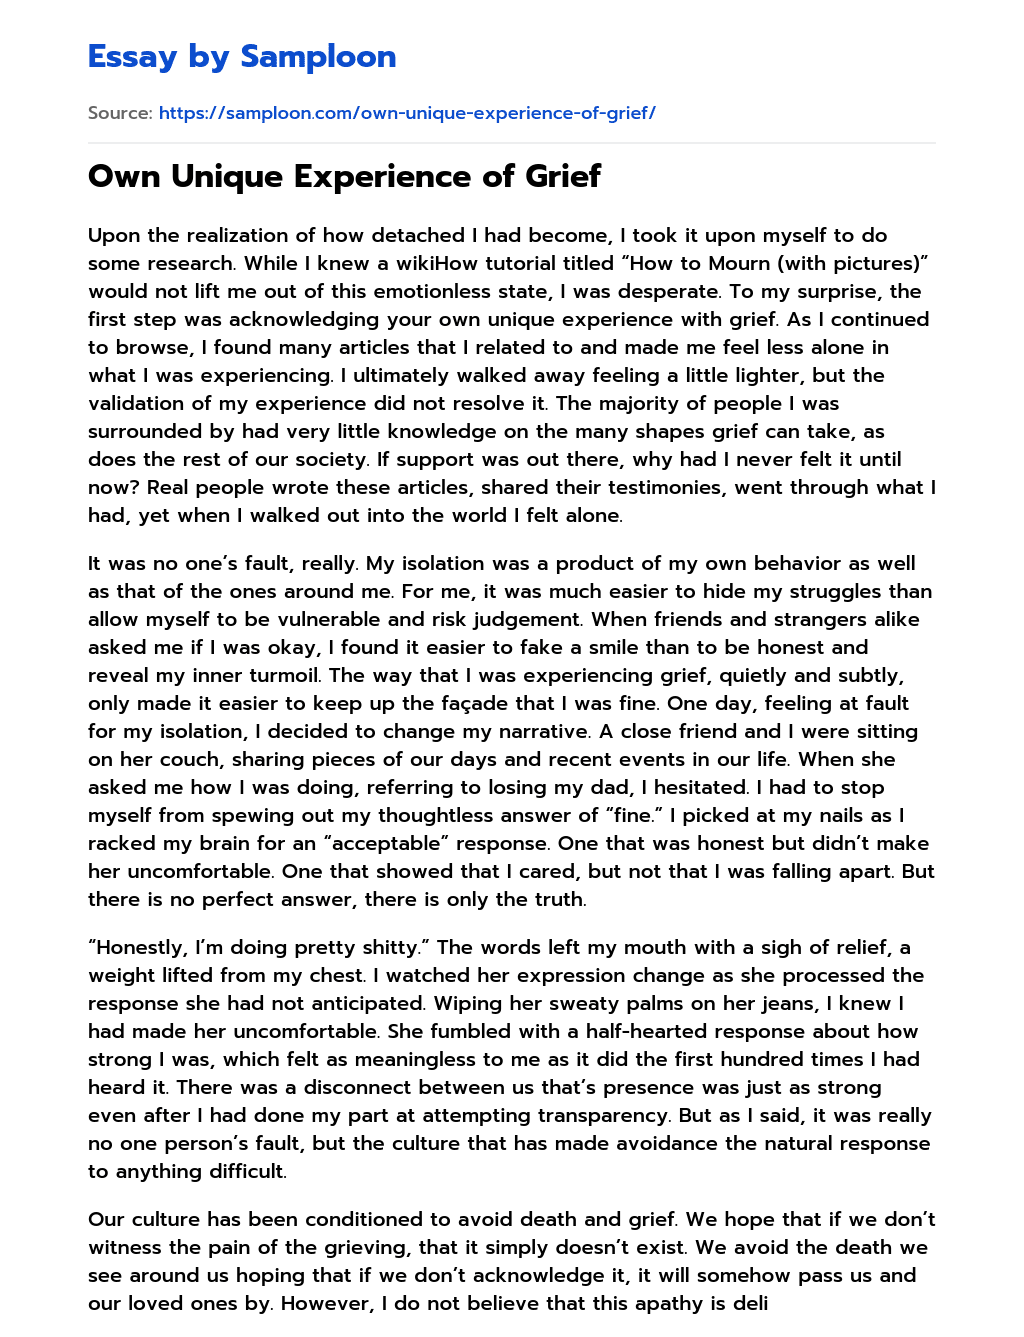 Own Unique Experience of Grief essay